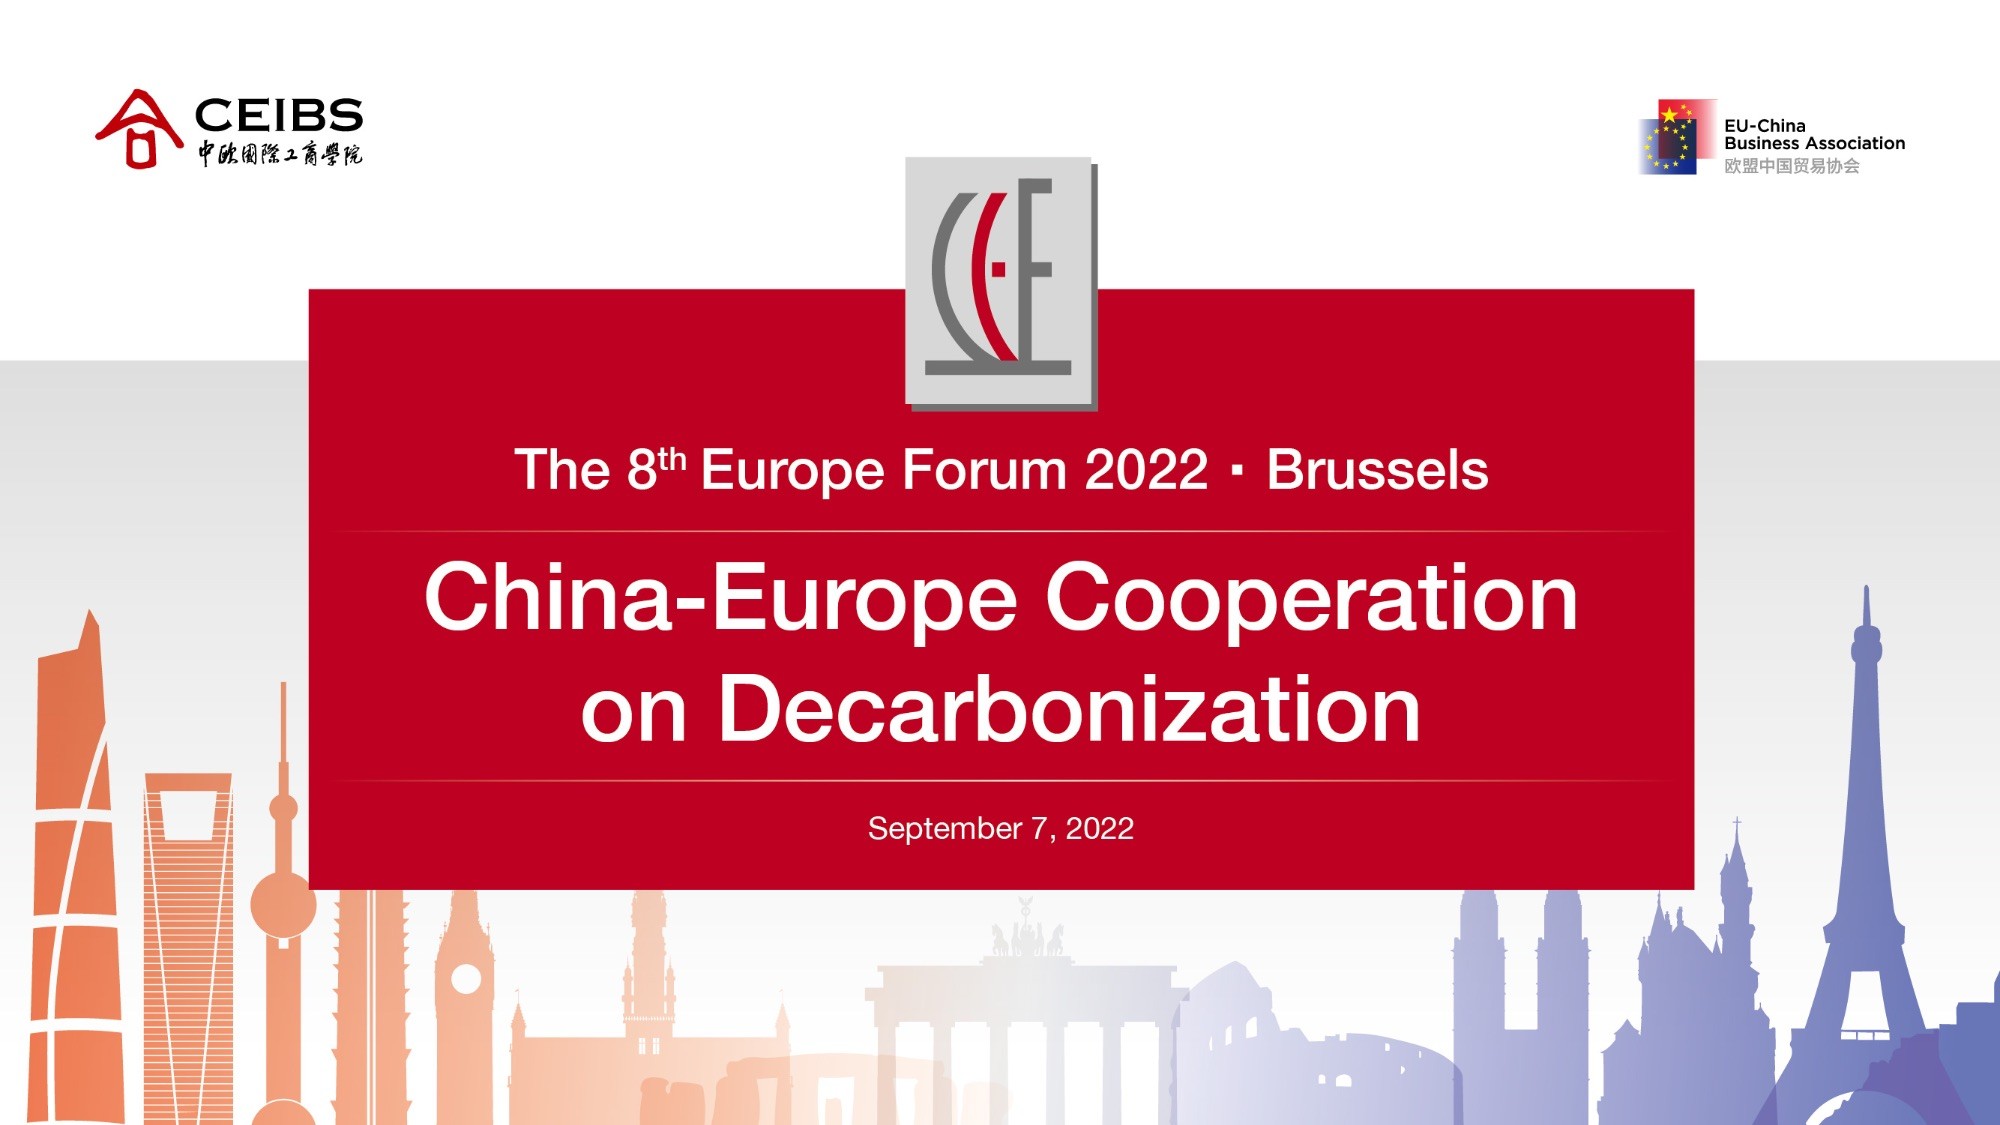 The 8th Europe Forum 2020 – Brussels: China-Europe Cooperation and Decarbonization – September 7, 2022